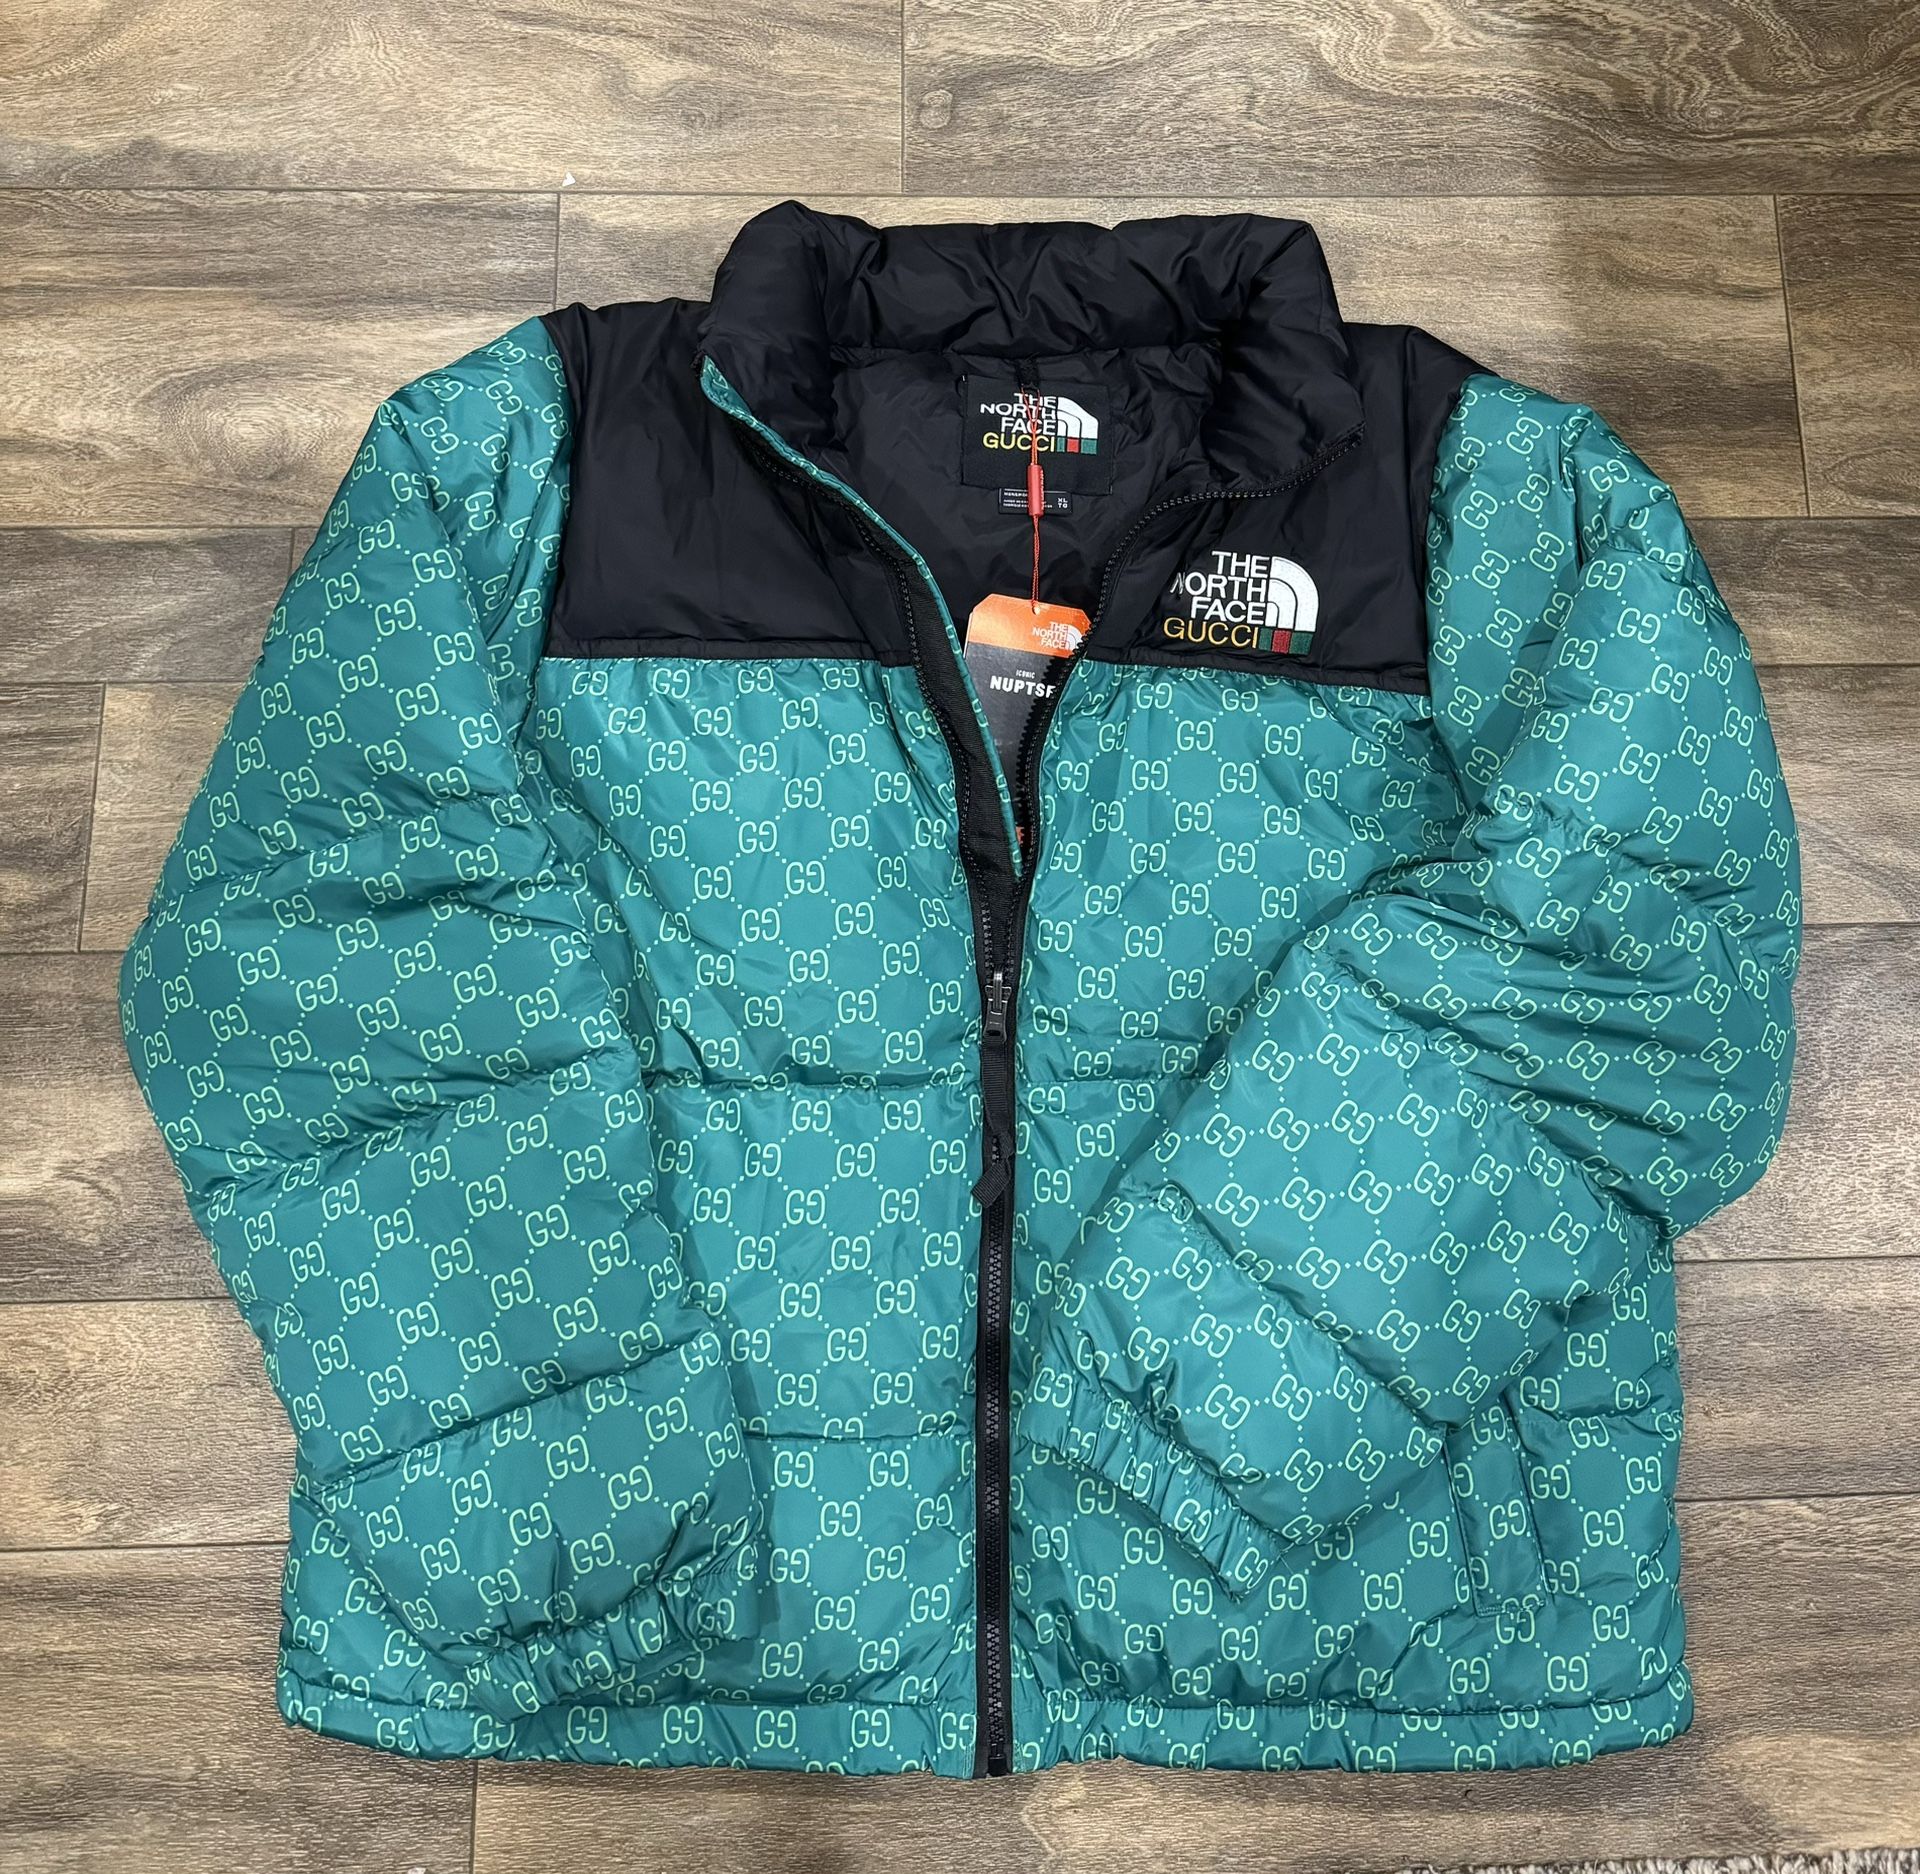 North Faced Puffer Jacket